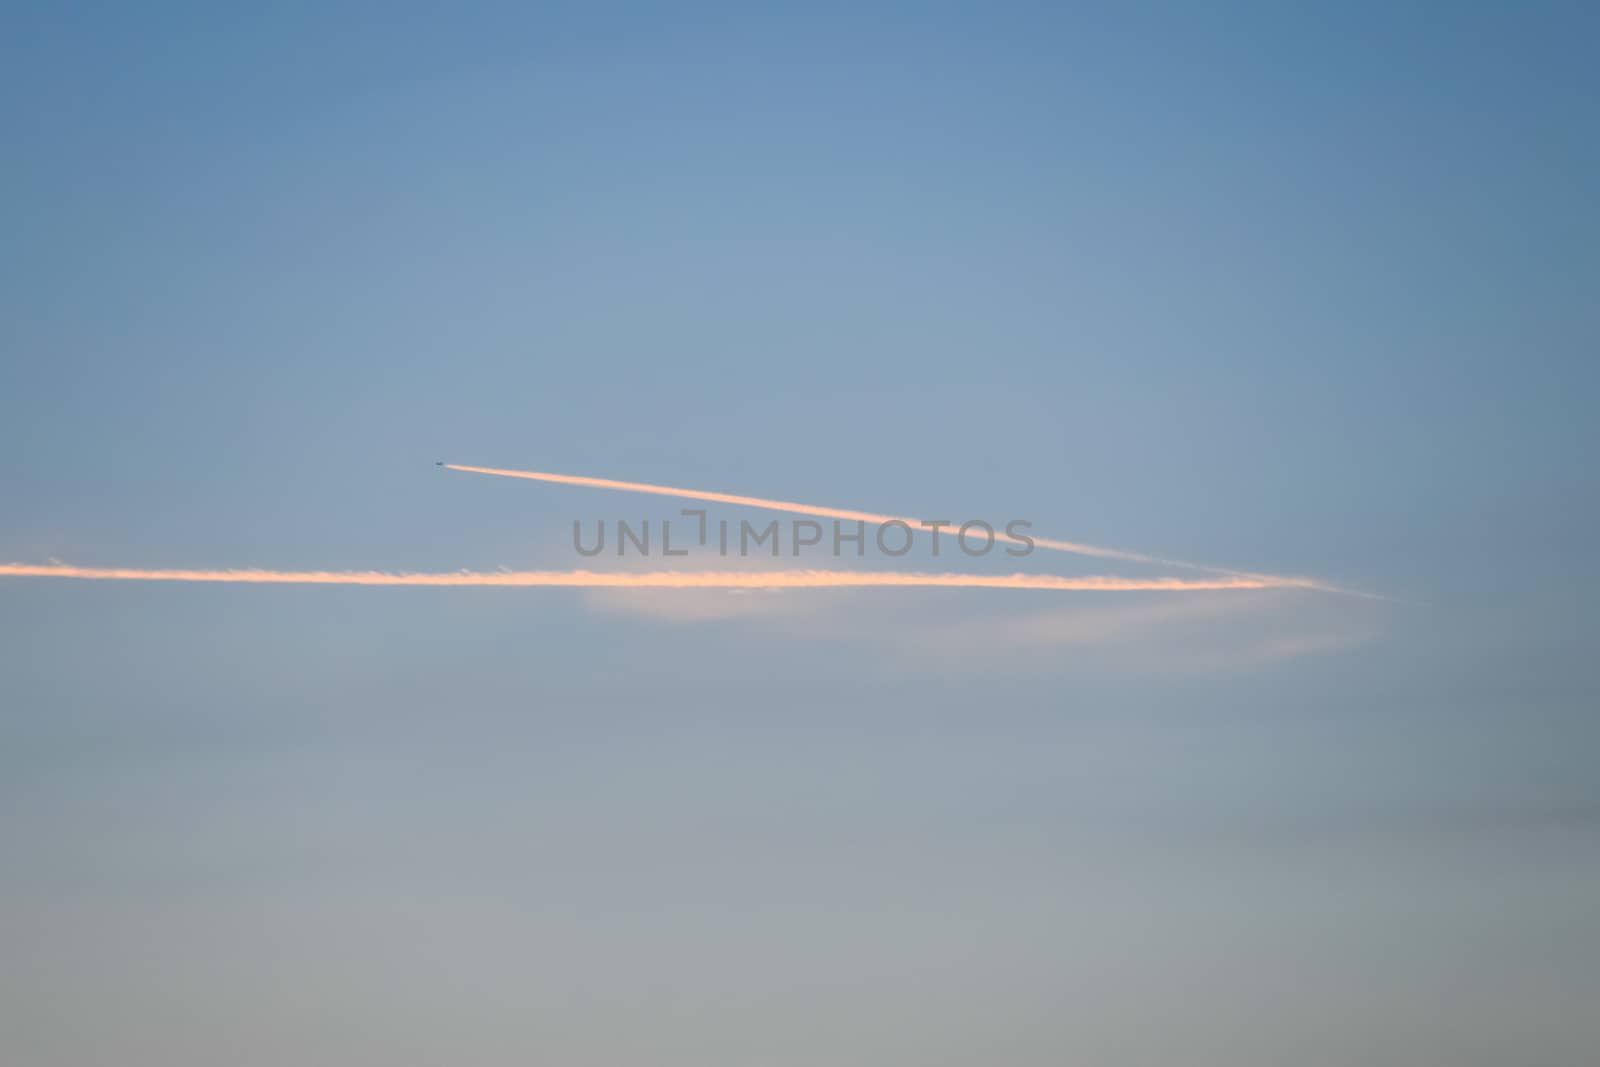 Contrail from airplane on a blue sky against a sunset. by fedoseevaolga